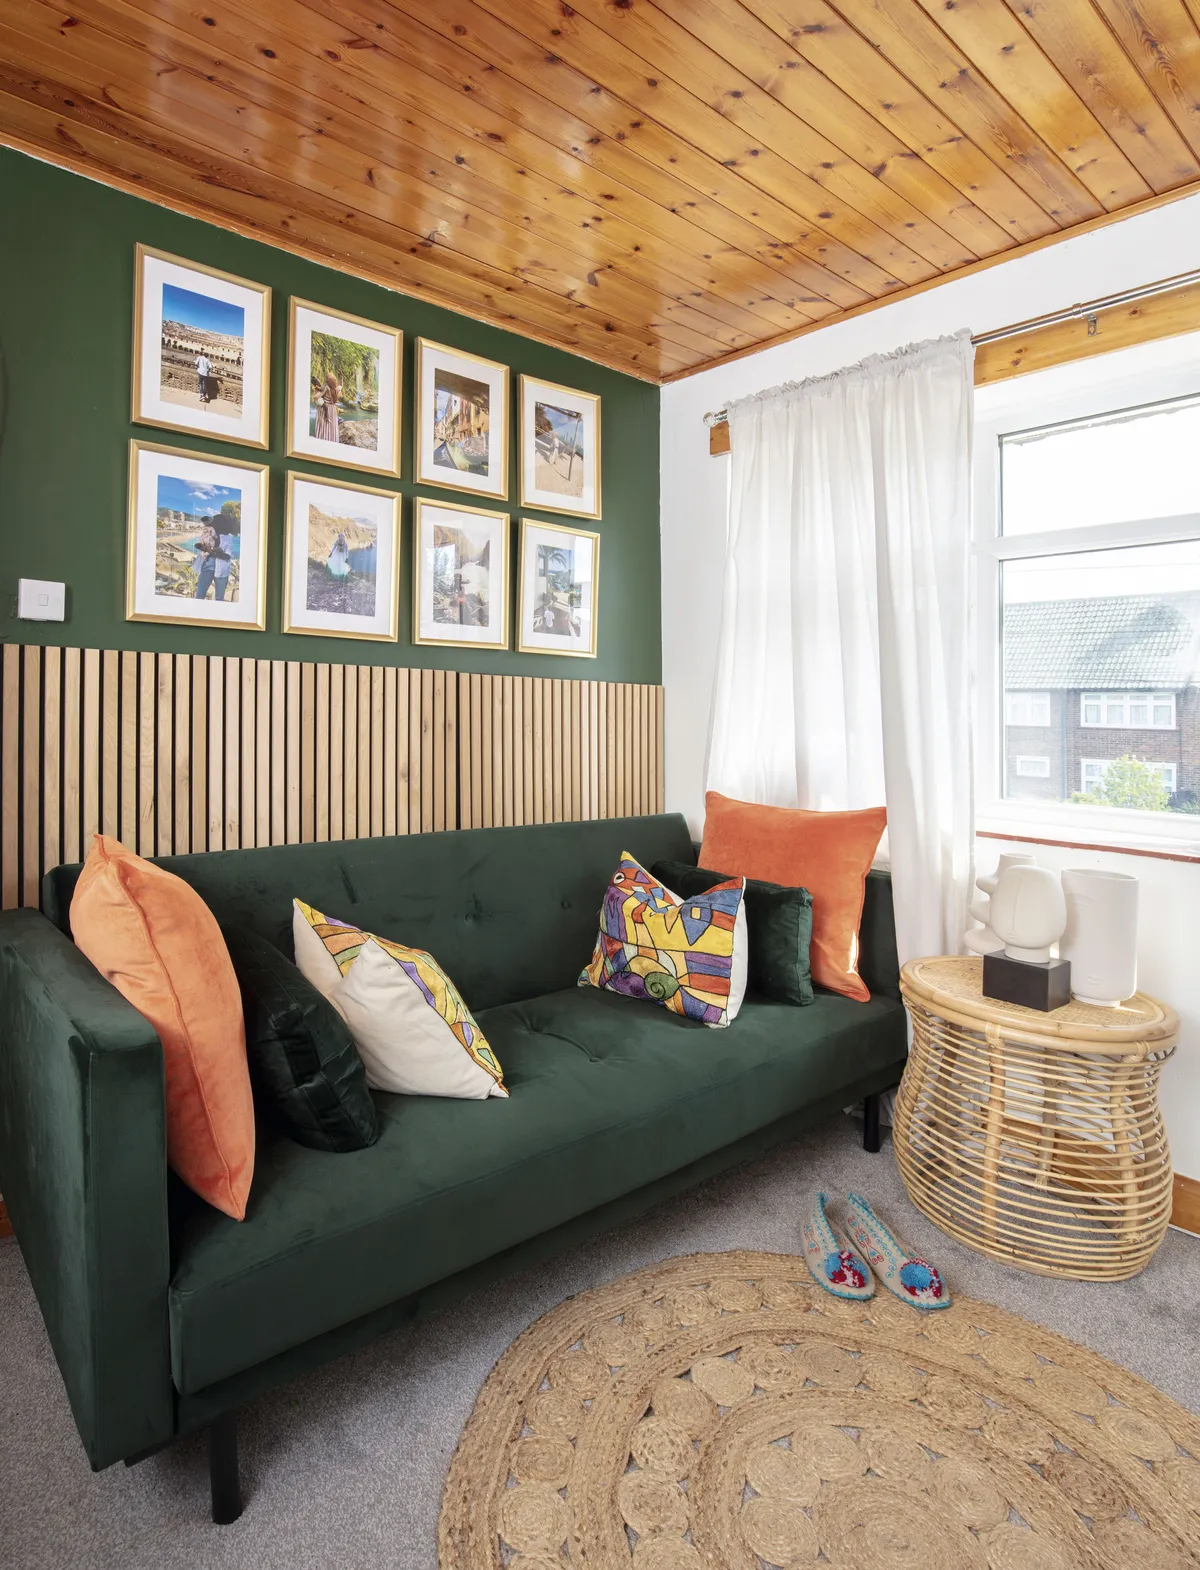 In the guest room, Alimah made panelling by gluing wooden cladding to the wall. ‘This is my favourite room in the house as it’s clutter-free, so it’s where I chill out,’ she says